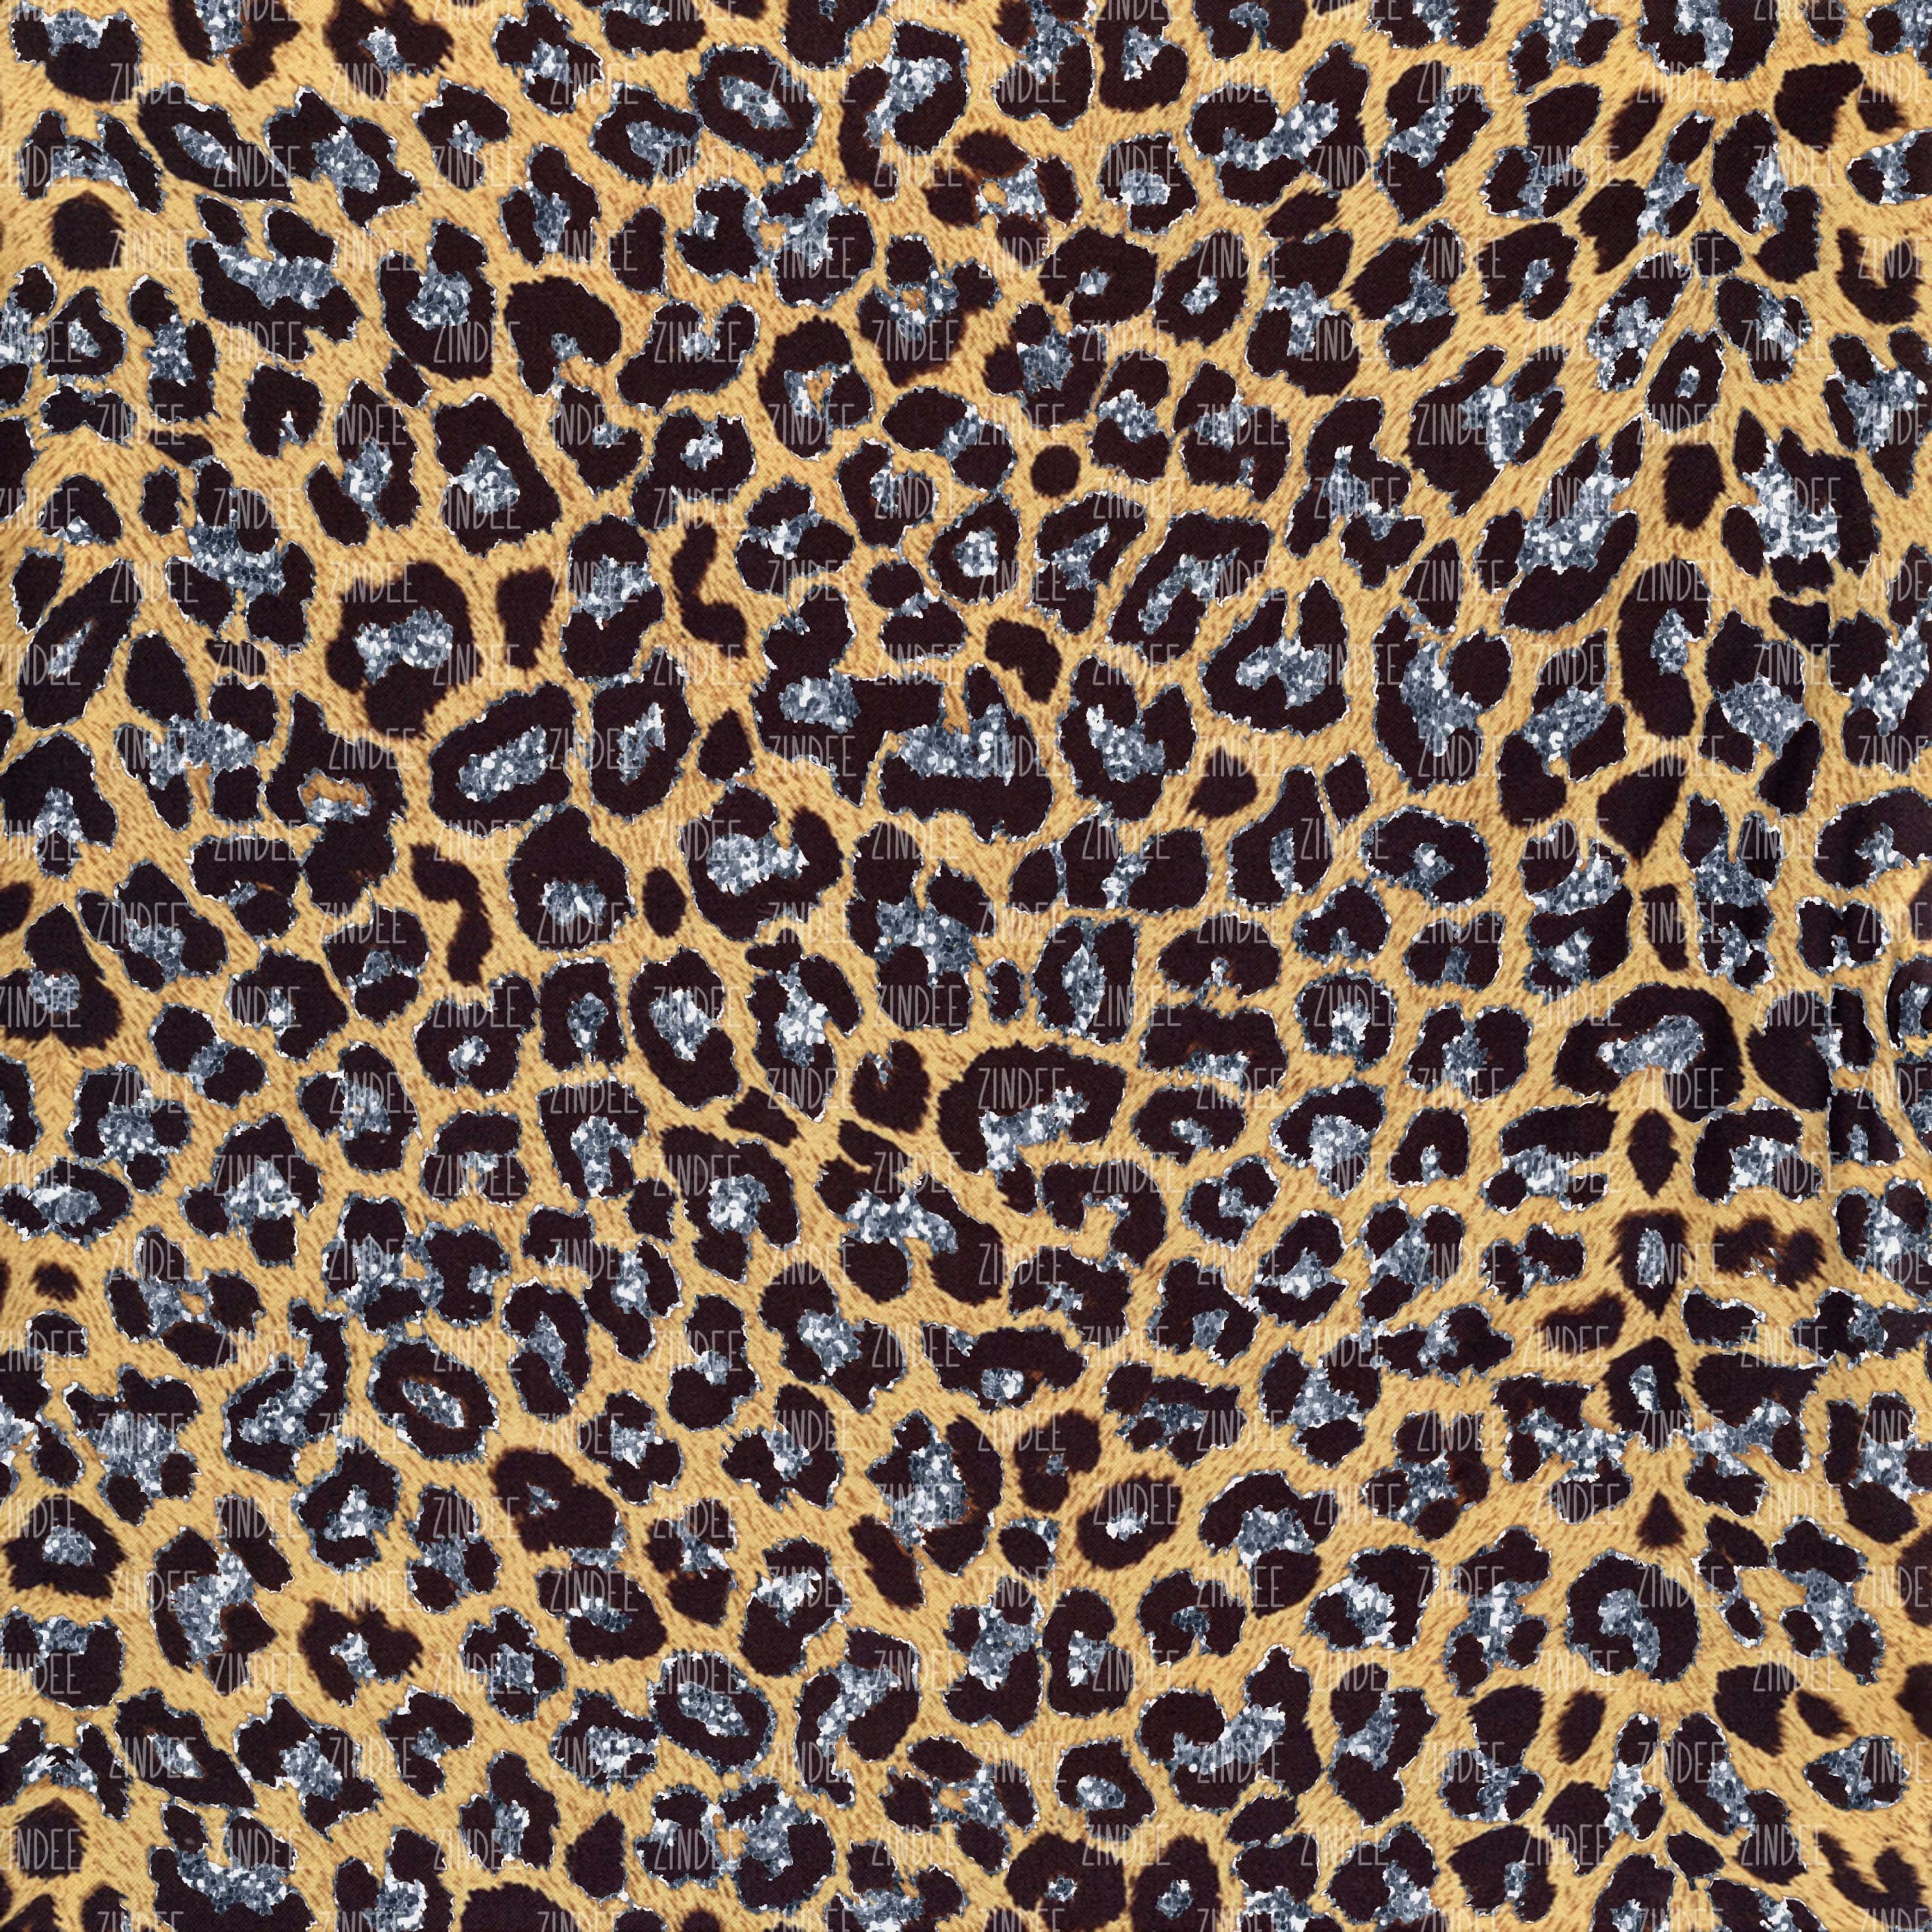 Blue and Black Glitter Leopard (vinyl) – Acrylic Blanks, Stickers, Printed  Vinyl, Glitter and more!